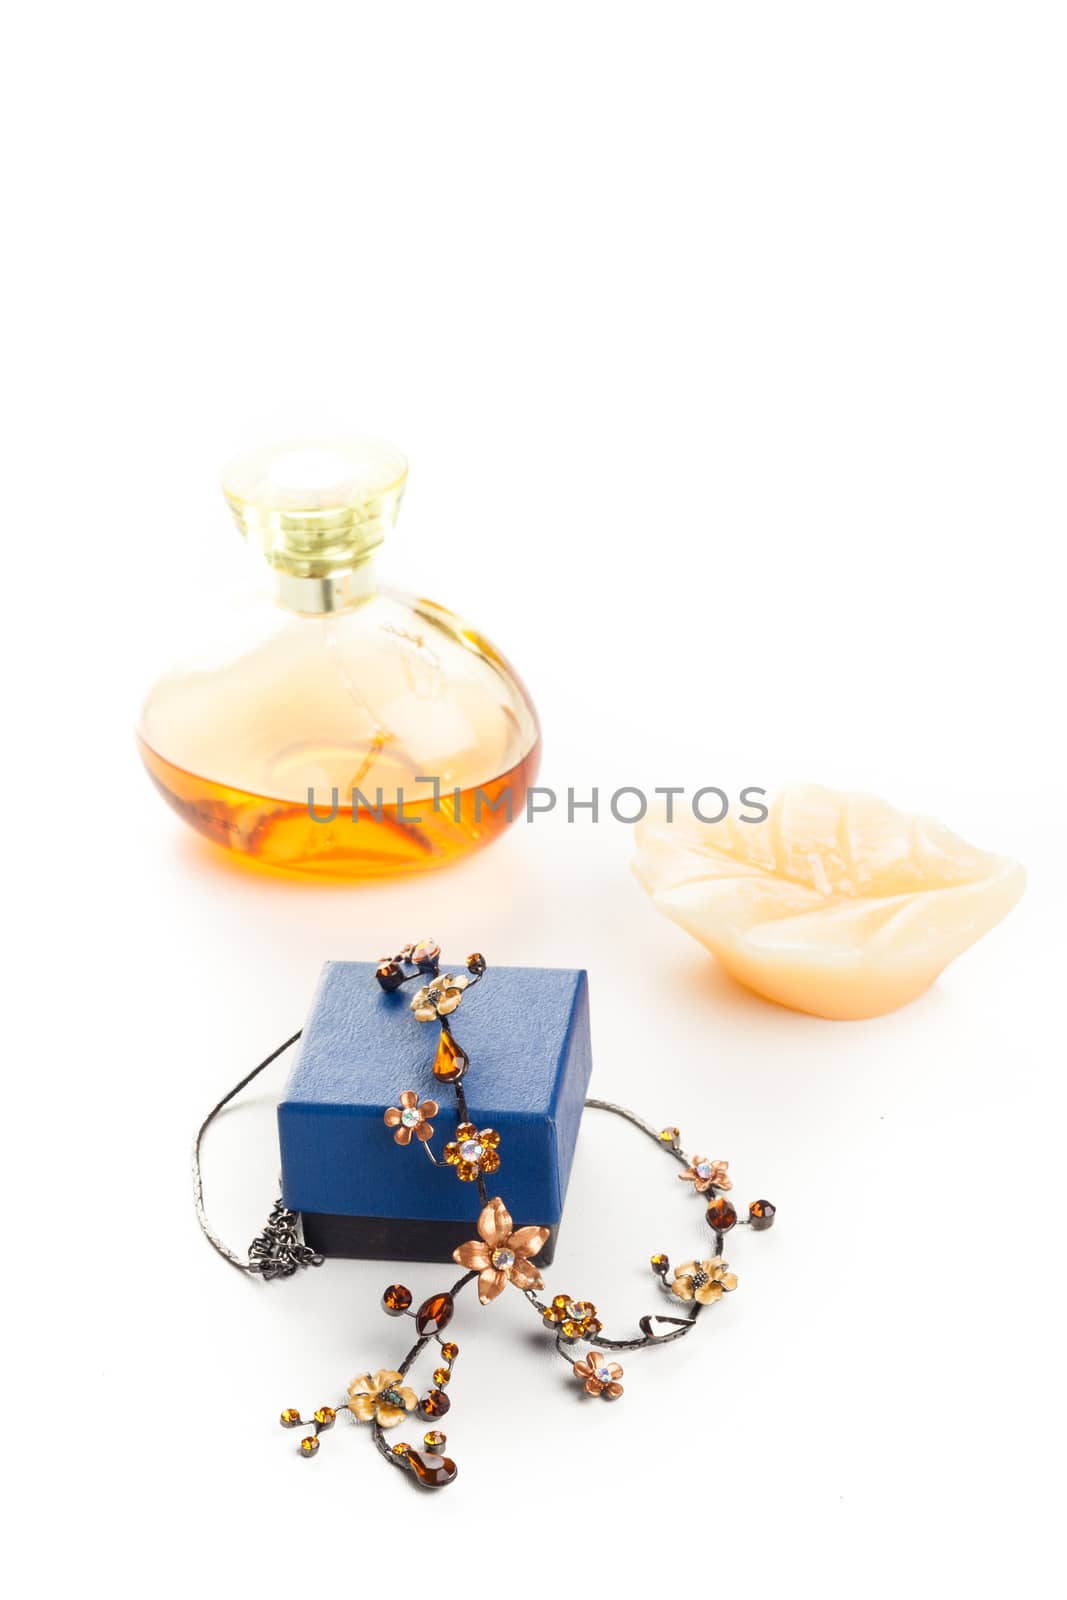 fashion necklace with box, perfume and aromatic candle